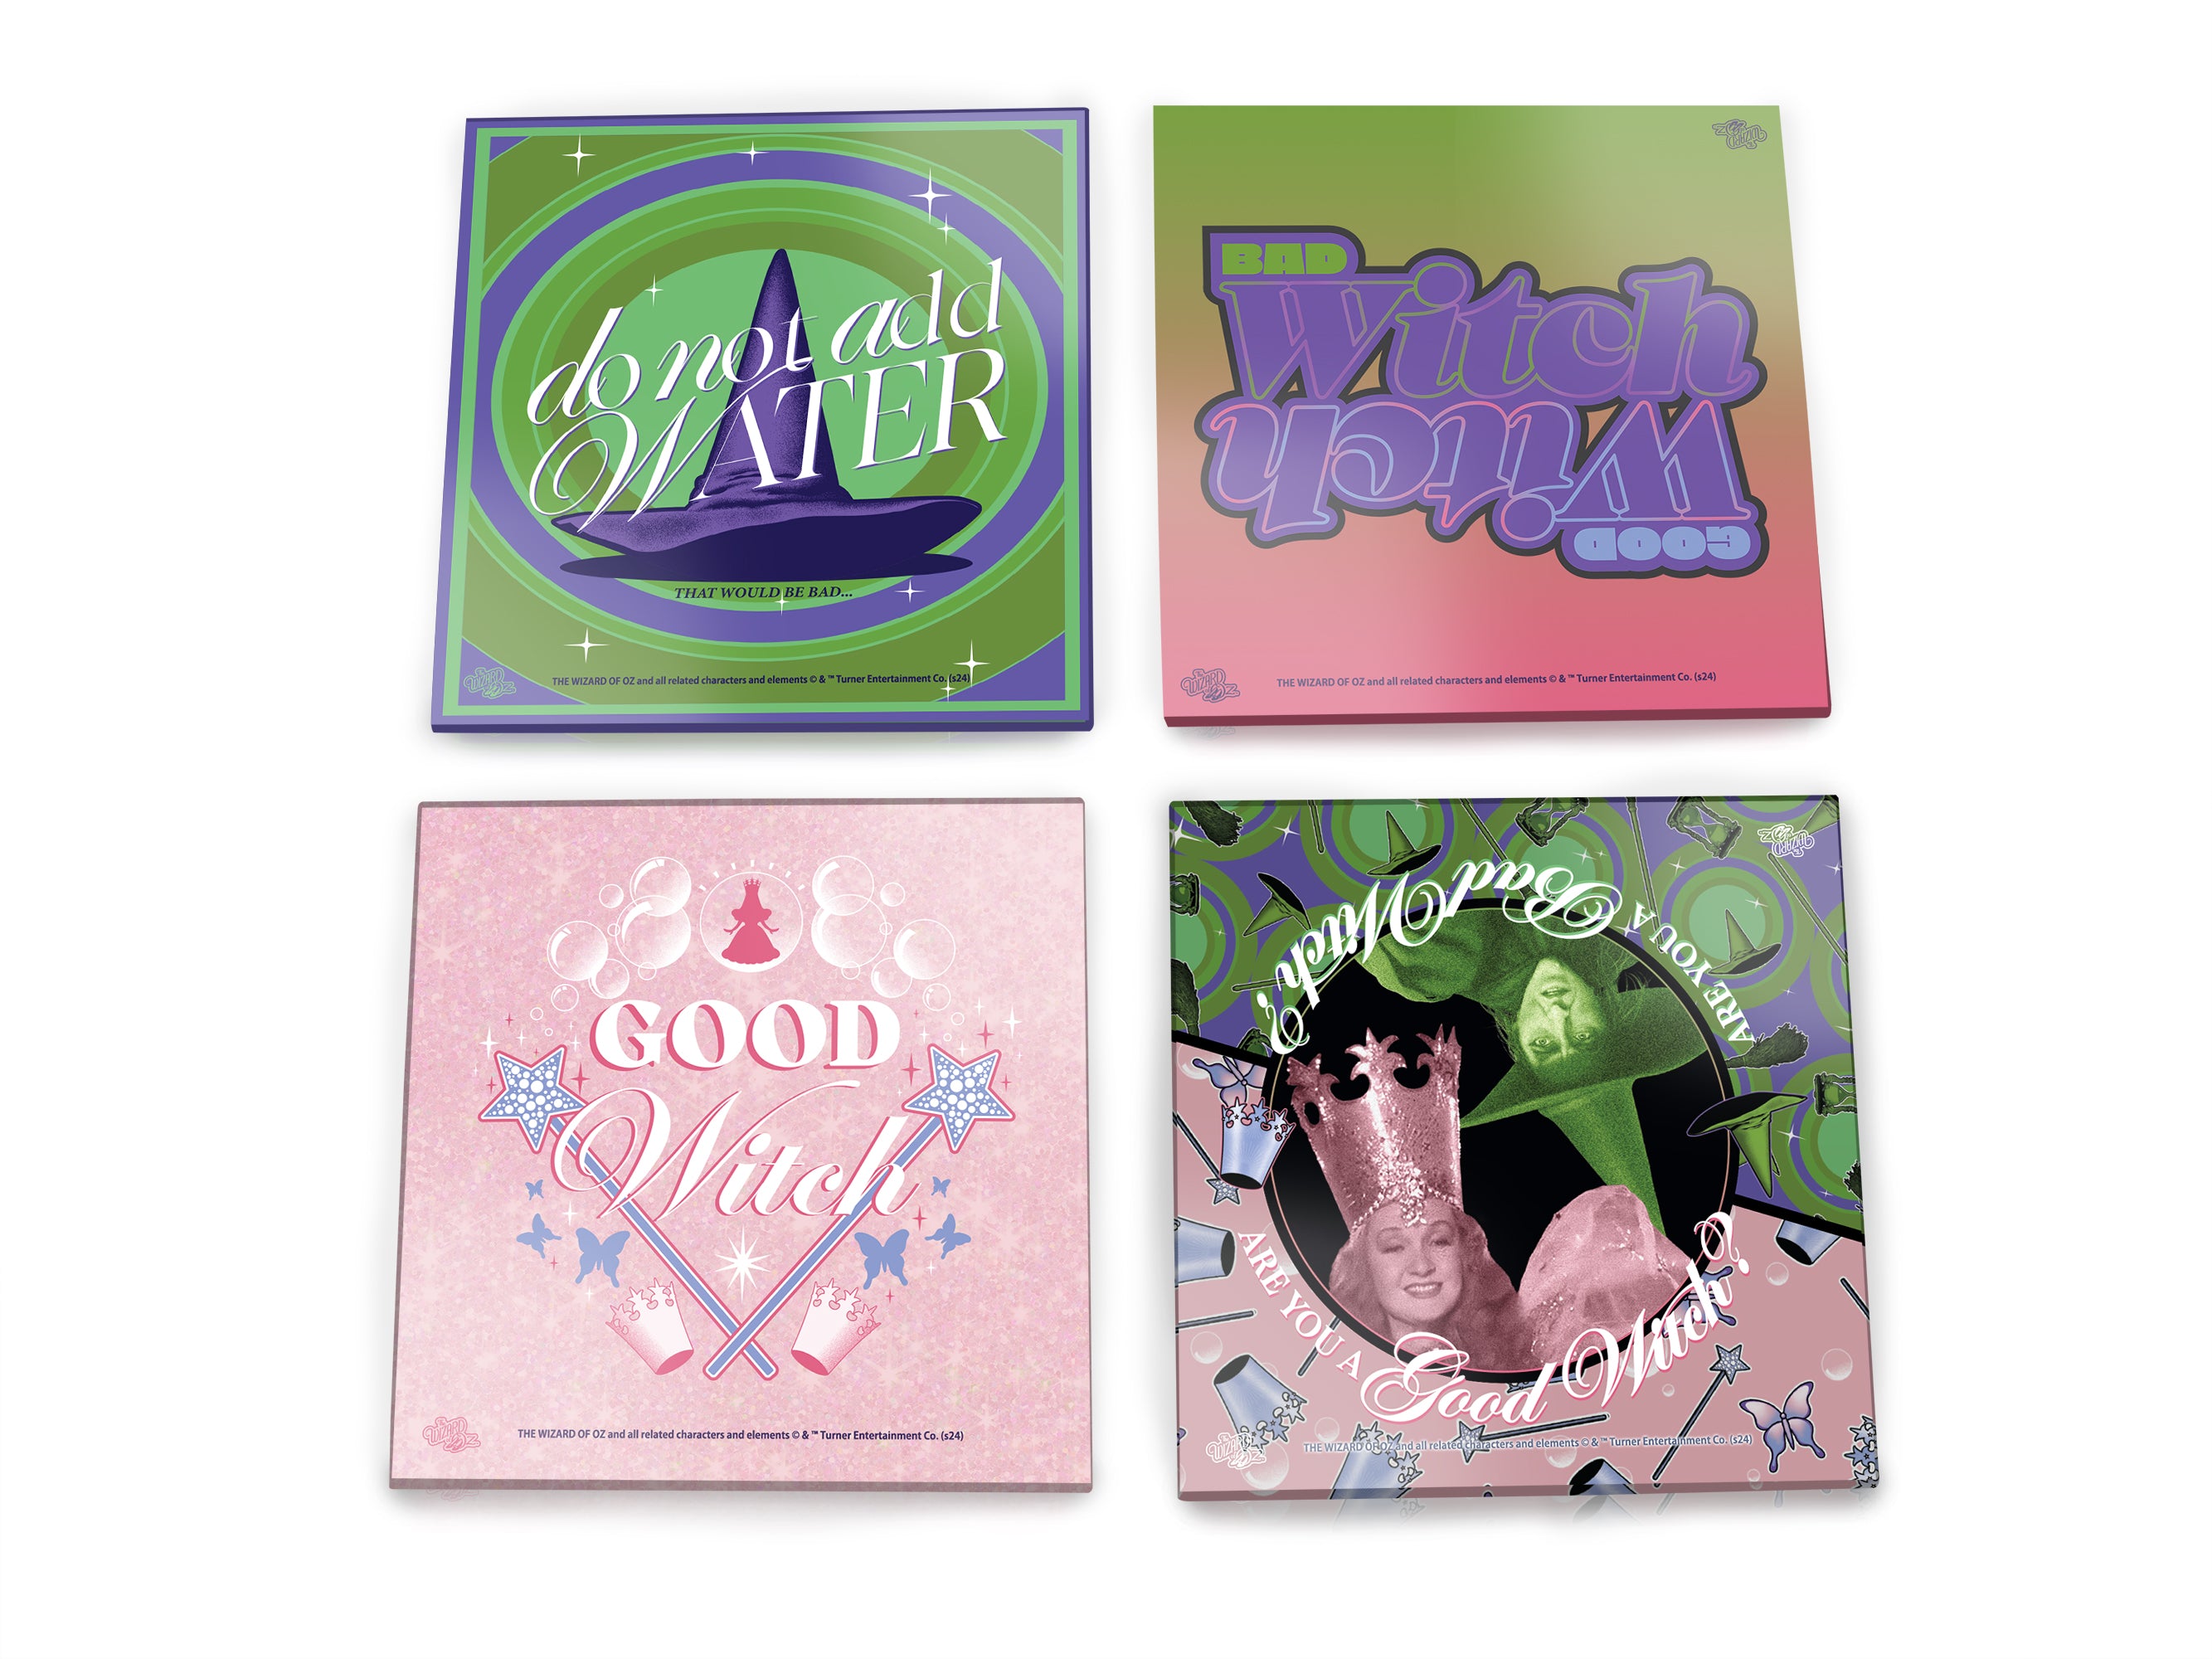 The Wizard of Oz (Good Witch V Bad Witch) Starfire Prints Glass Coaster Set SPCSTR1314